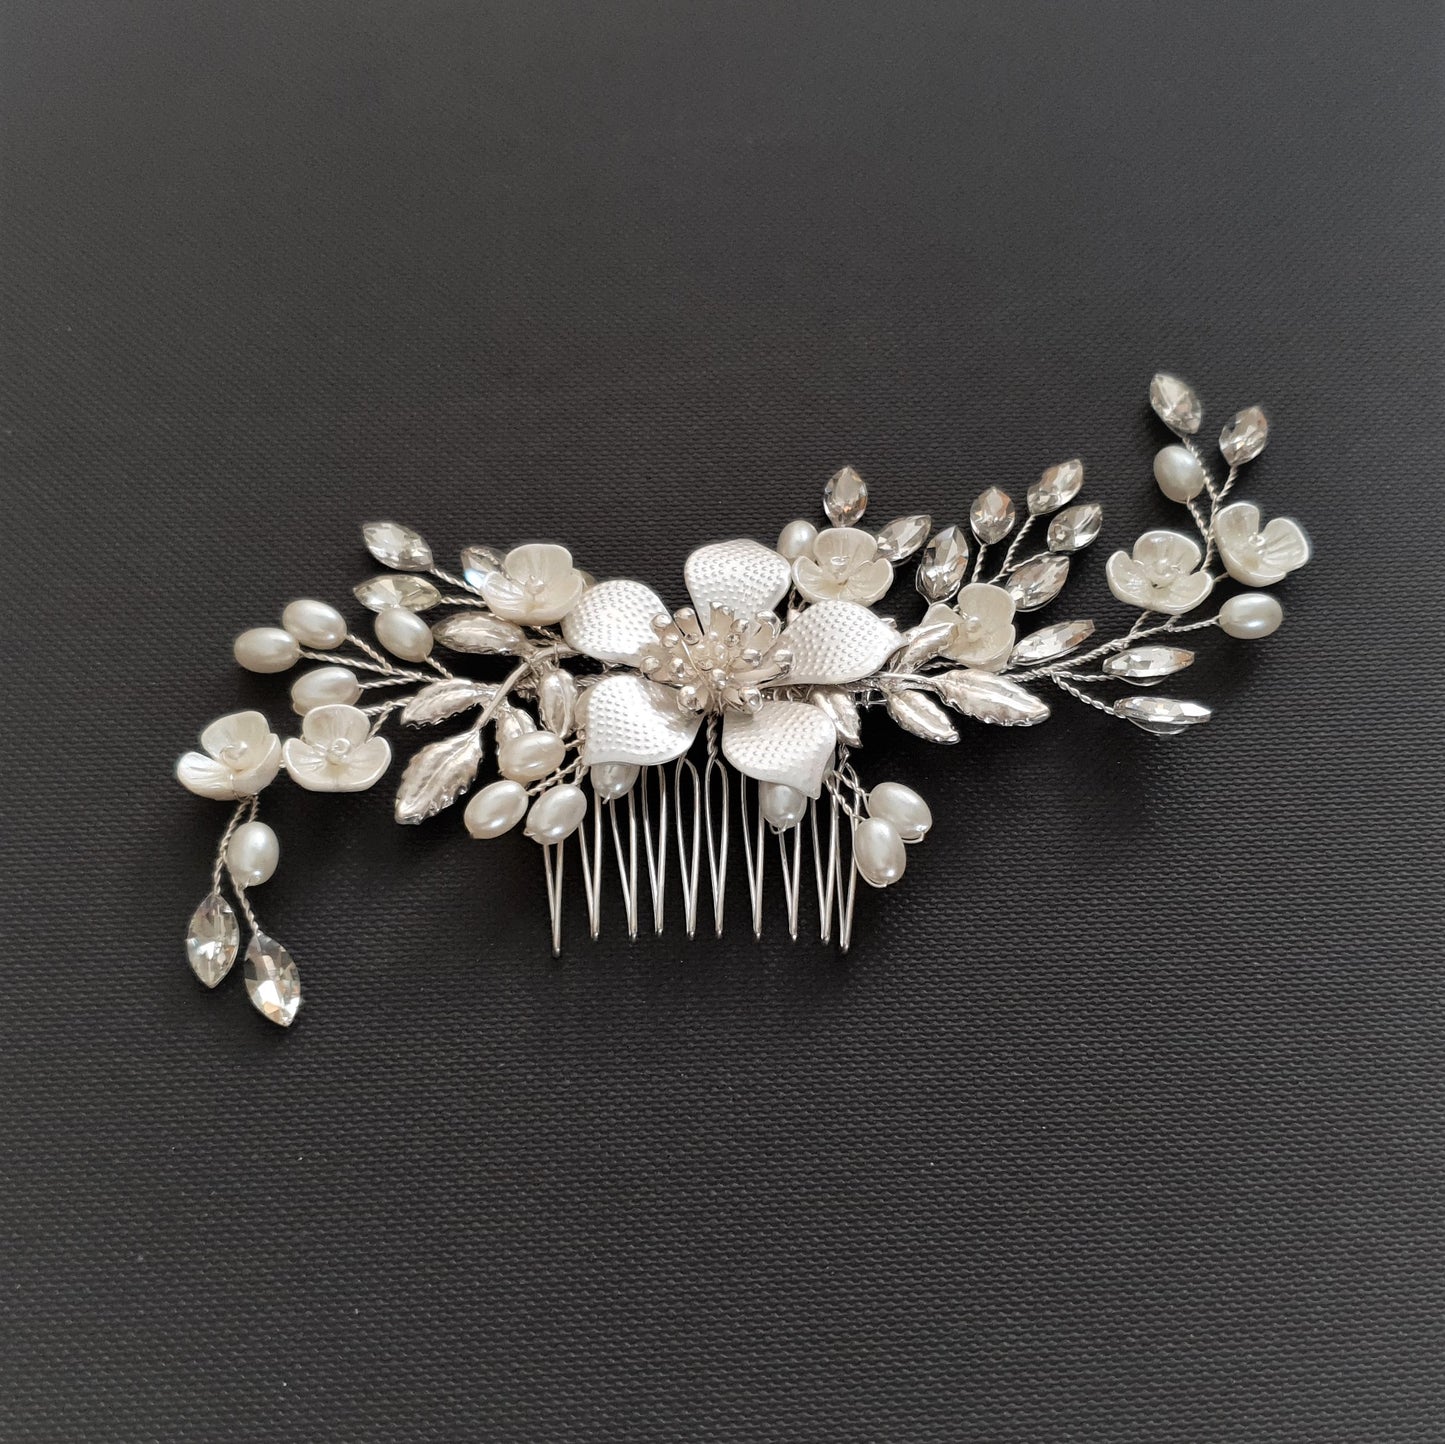 Jeweled Rose Gold Bridal Hair Comb with Pearl & Crystal Leaves-Freya